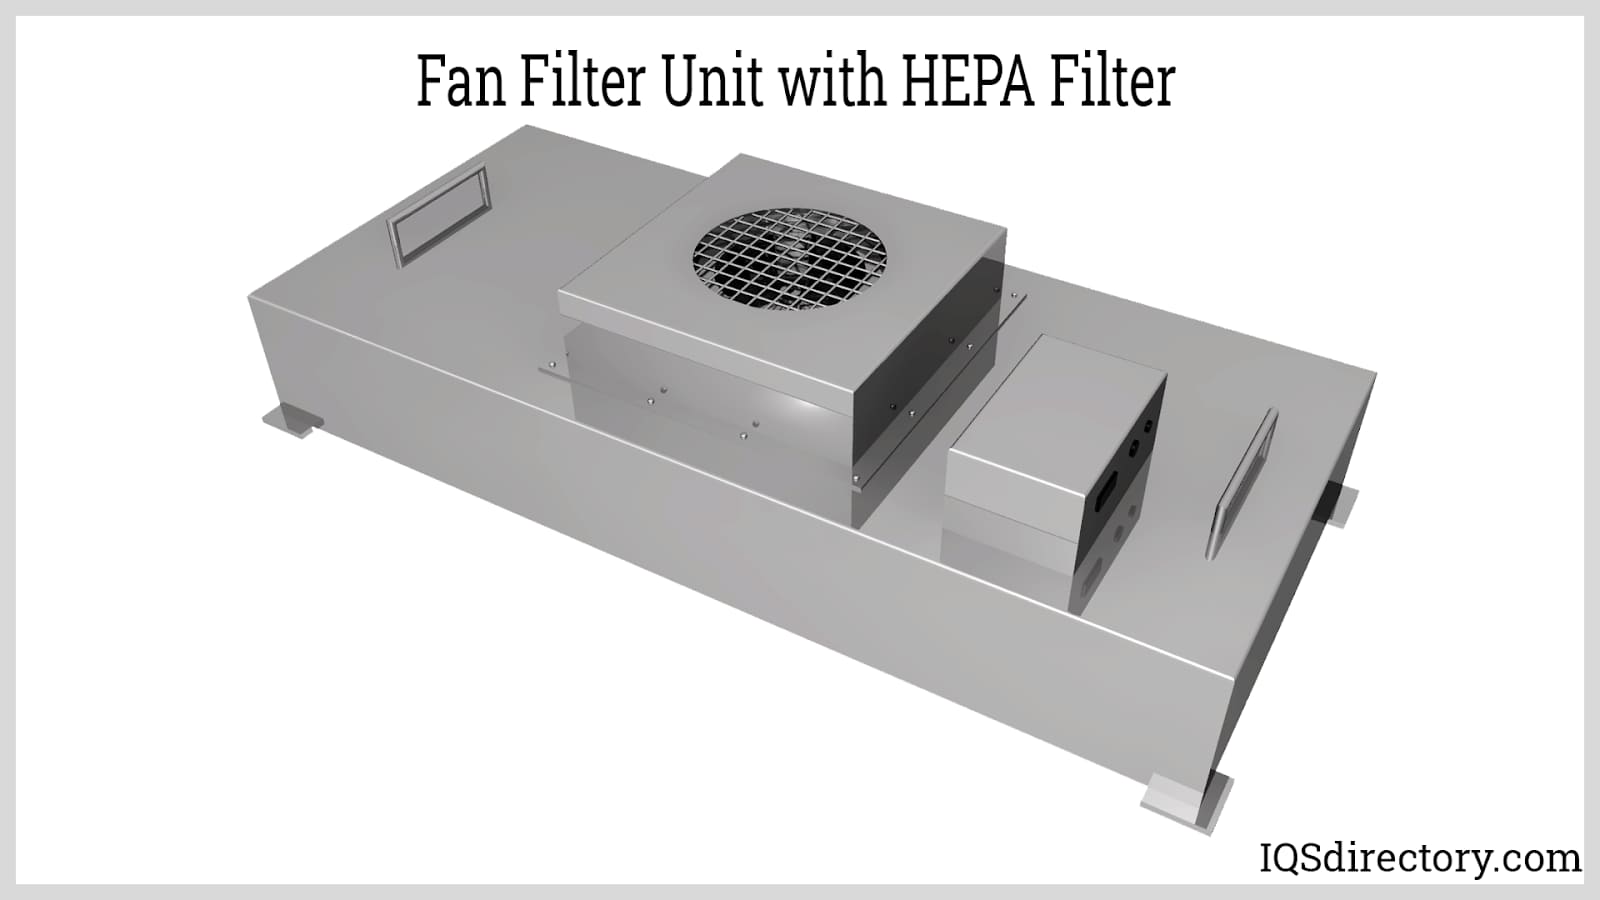 Filter Unit with HEPA Filter